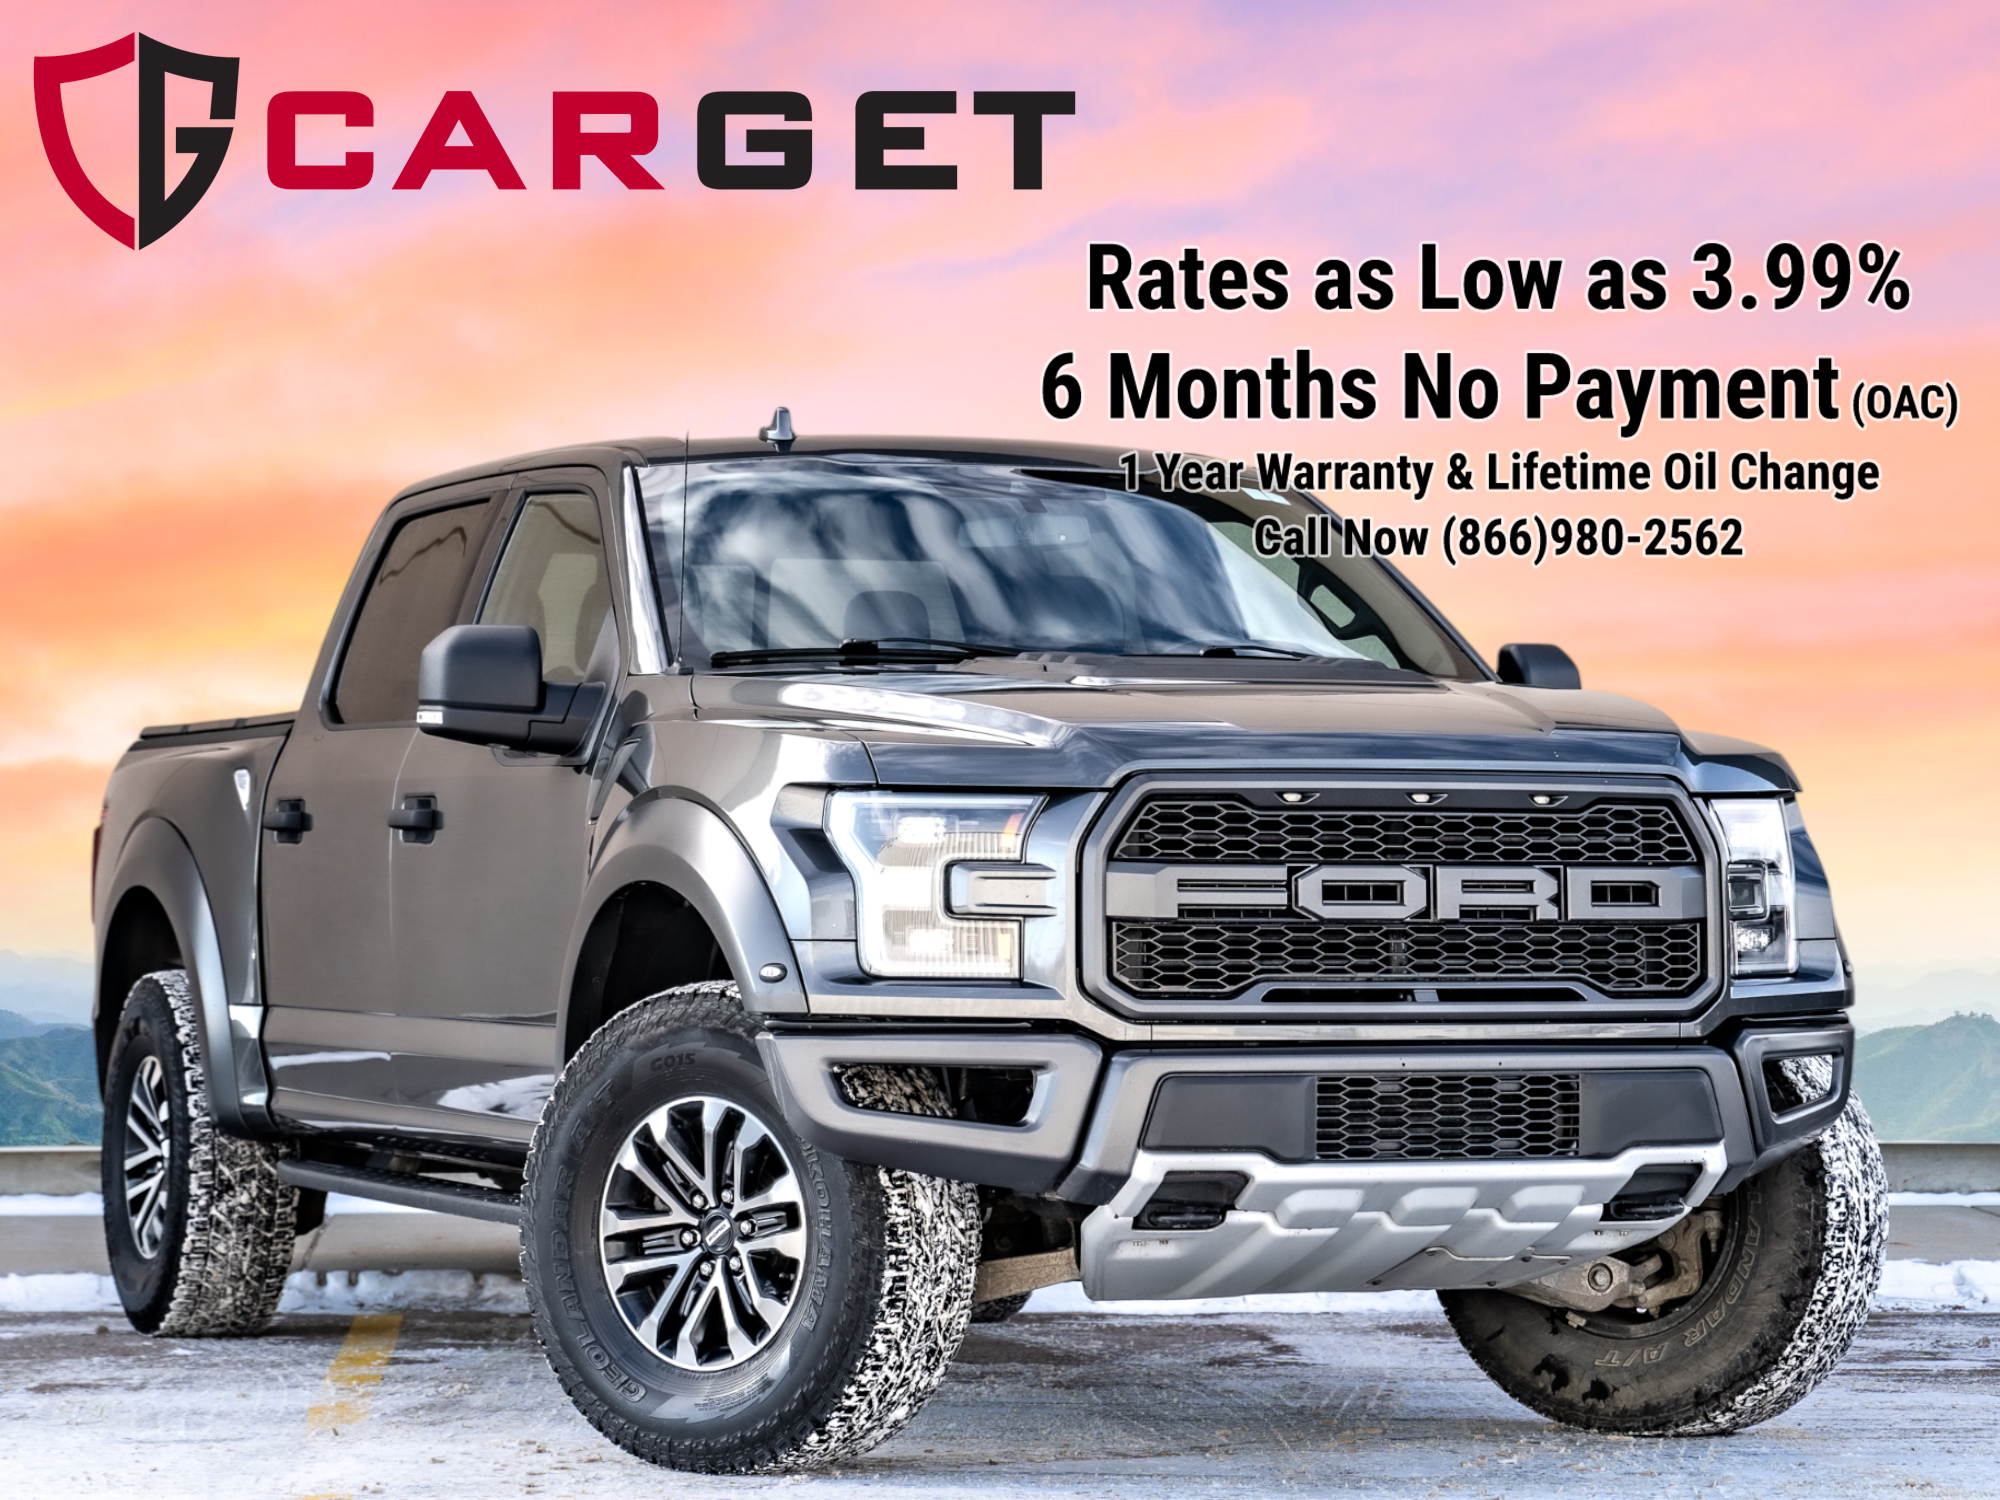 2019 Ford F-150 450HP| 4WD| SuperCrew| Heated Seats